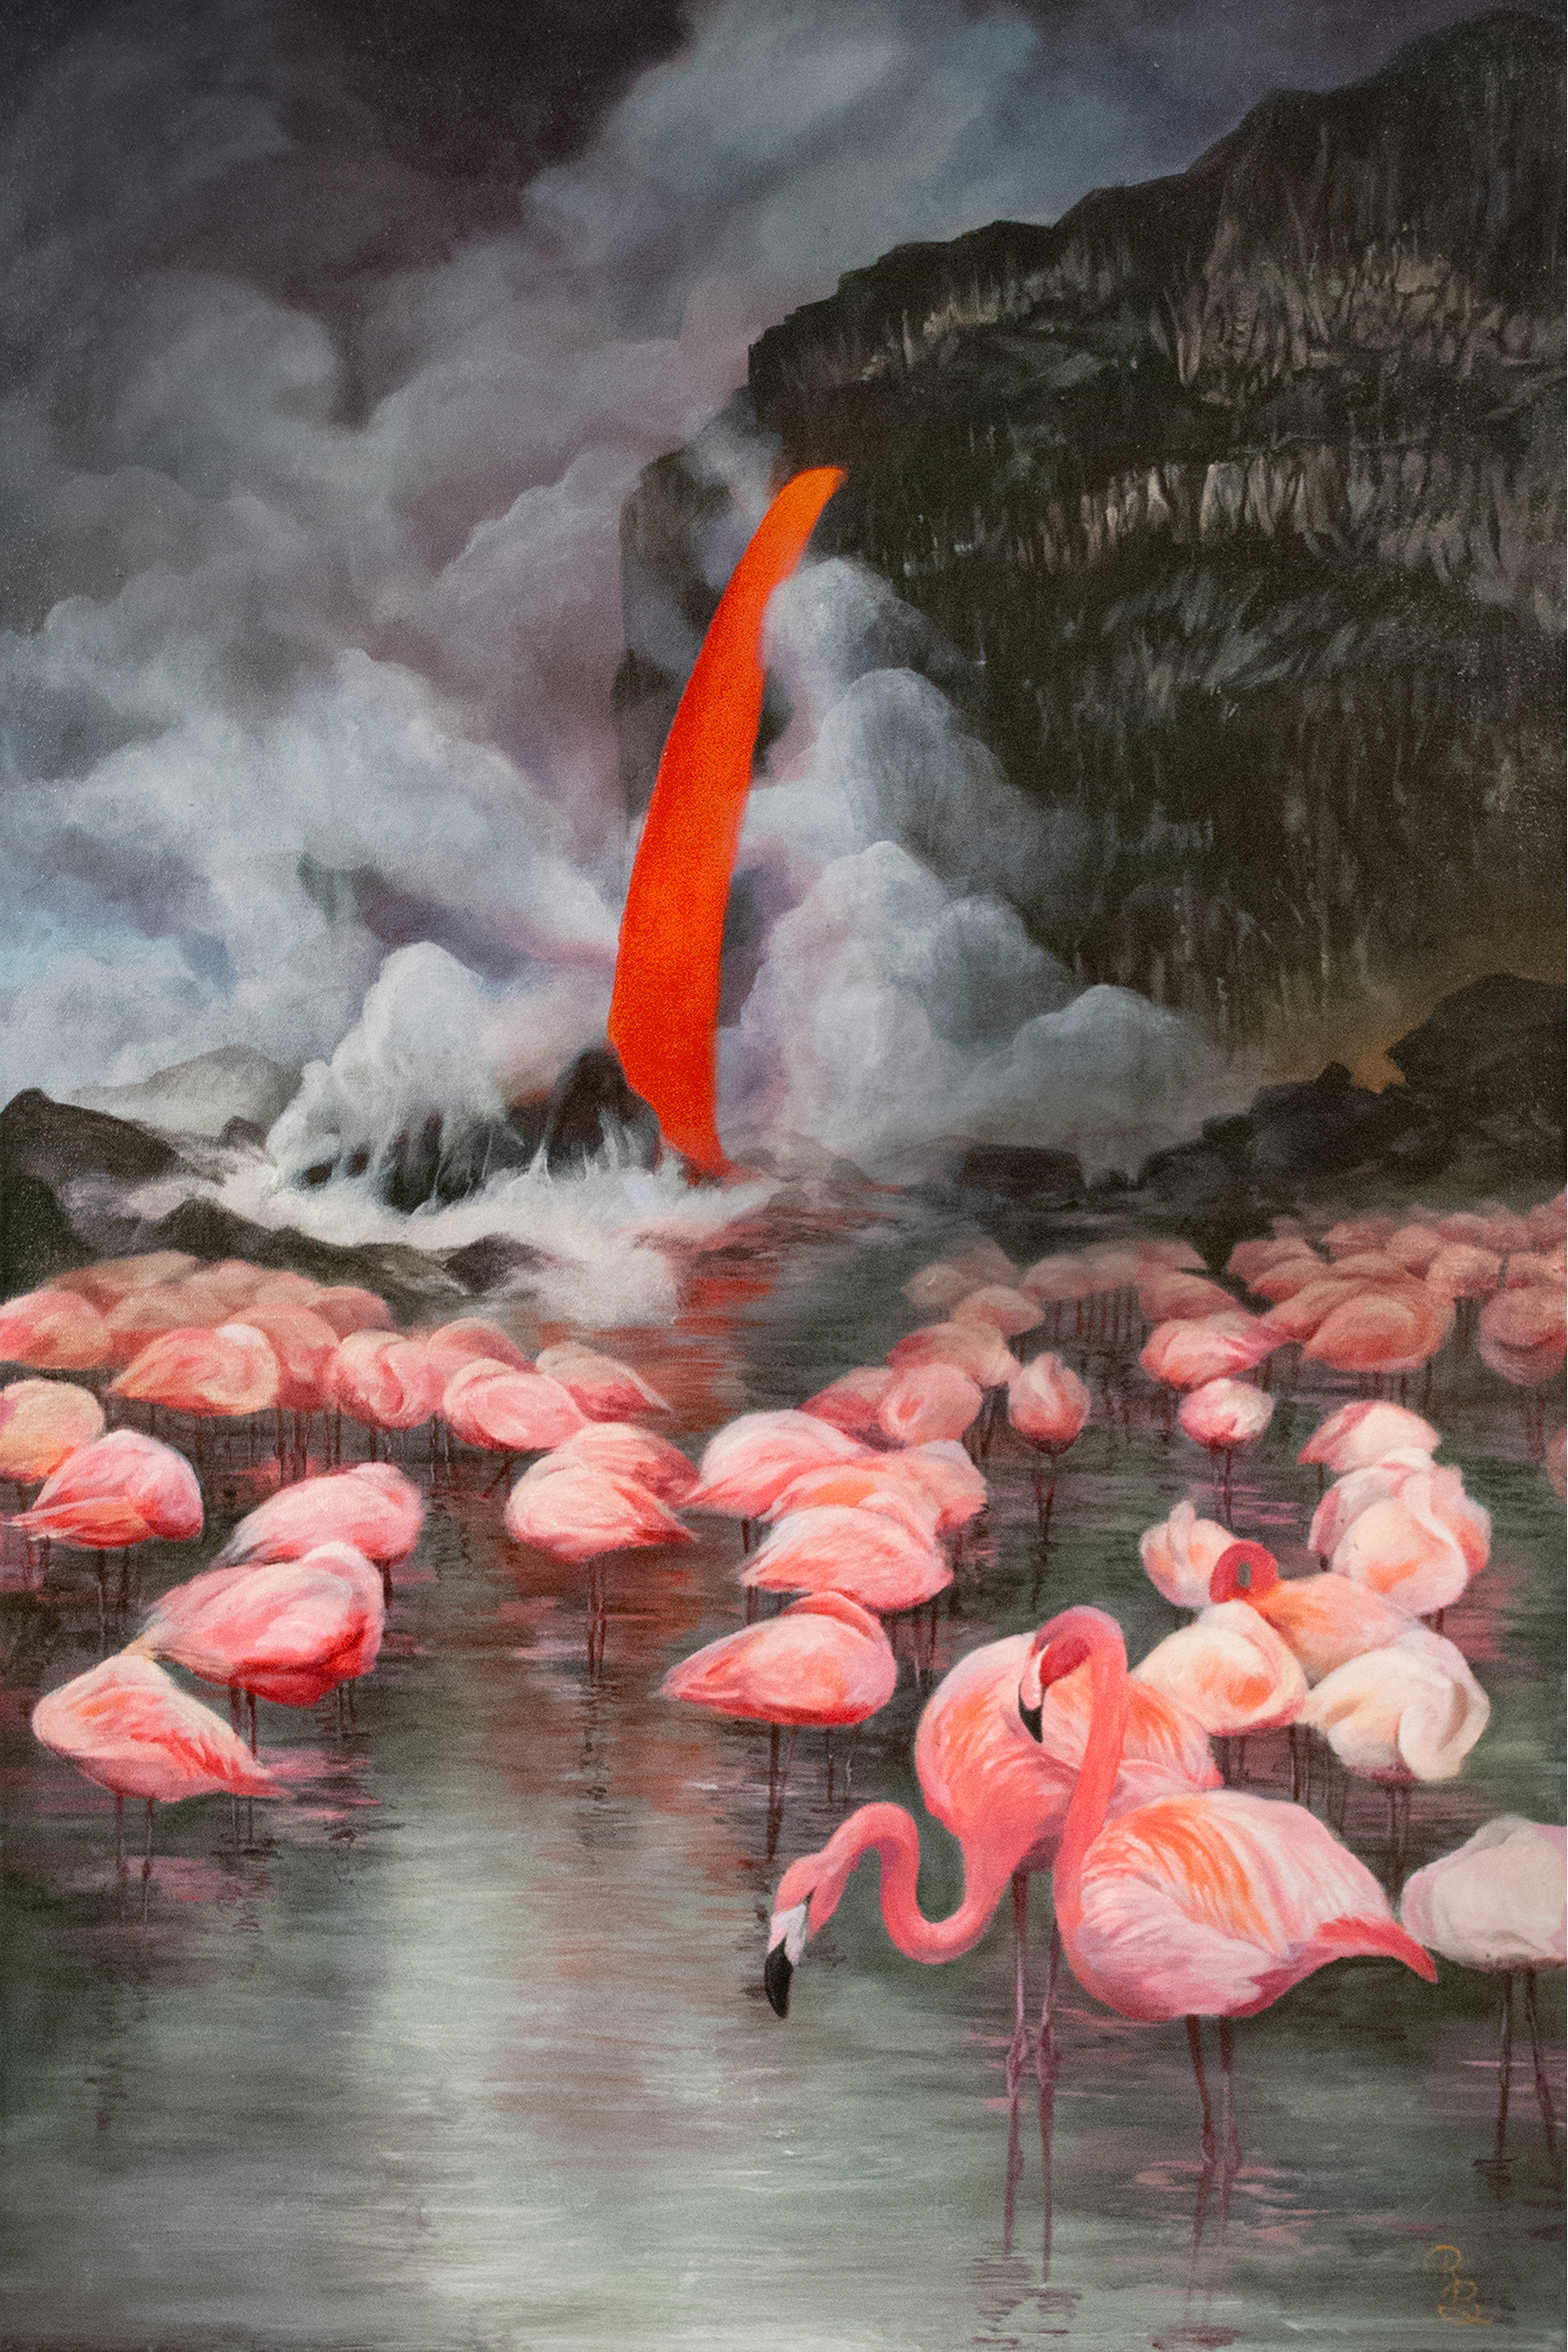 a flock of flamingos standing in front of a backdrop of a single lava flow cascading from a sheer cliff face with smoke rising up around